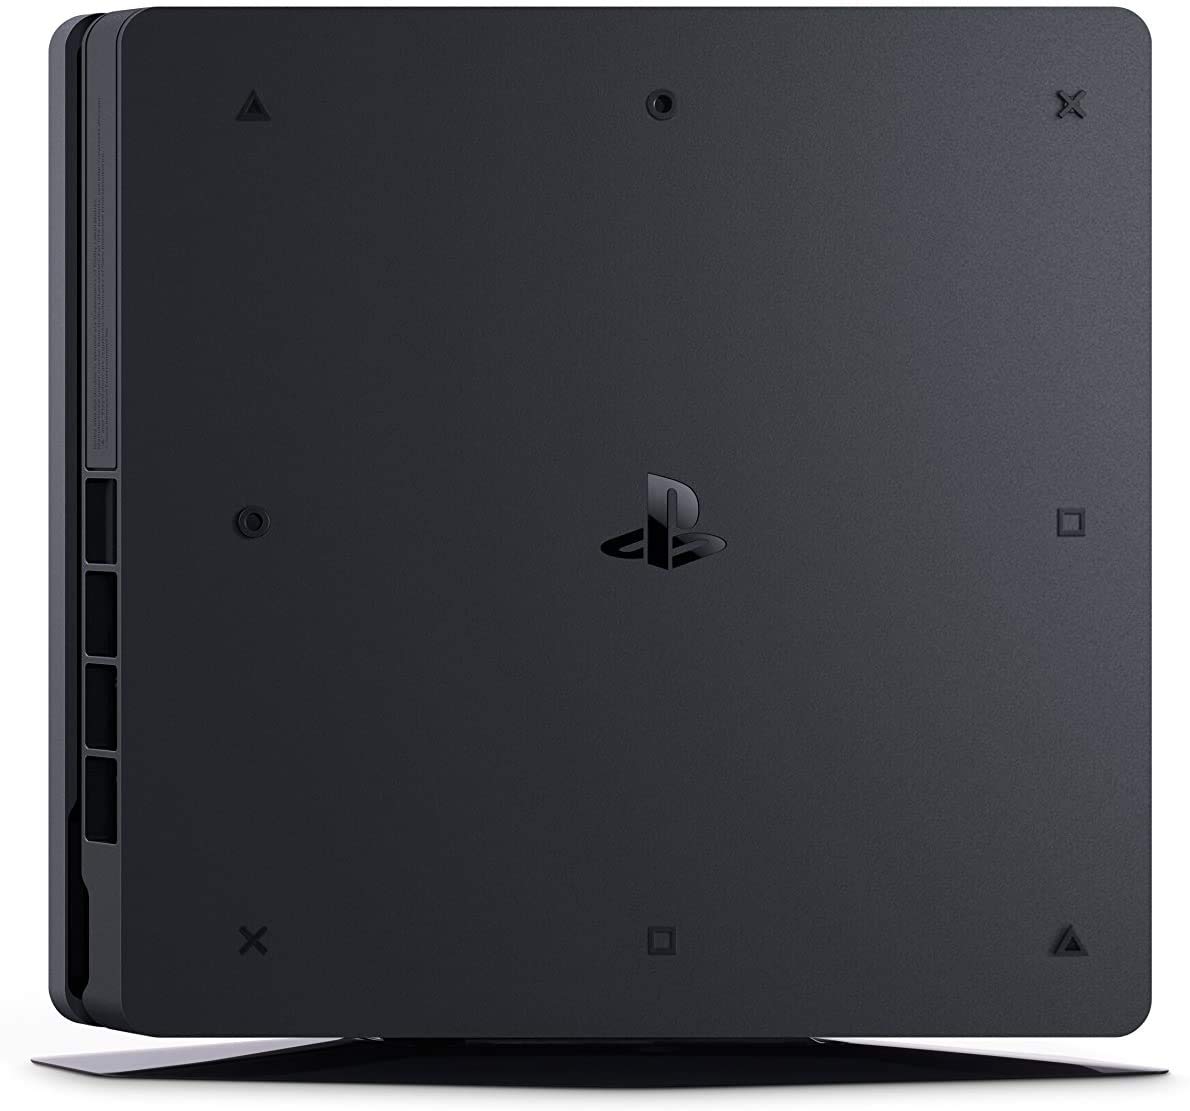 RPlay Play-Station 4 PS4 1TB Slim Edition Jet Black With 1 Wireless Controller